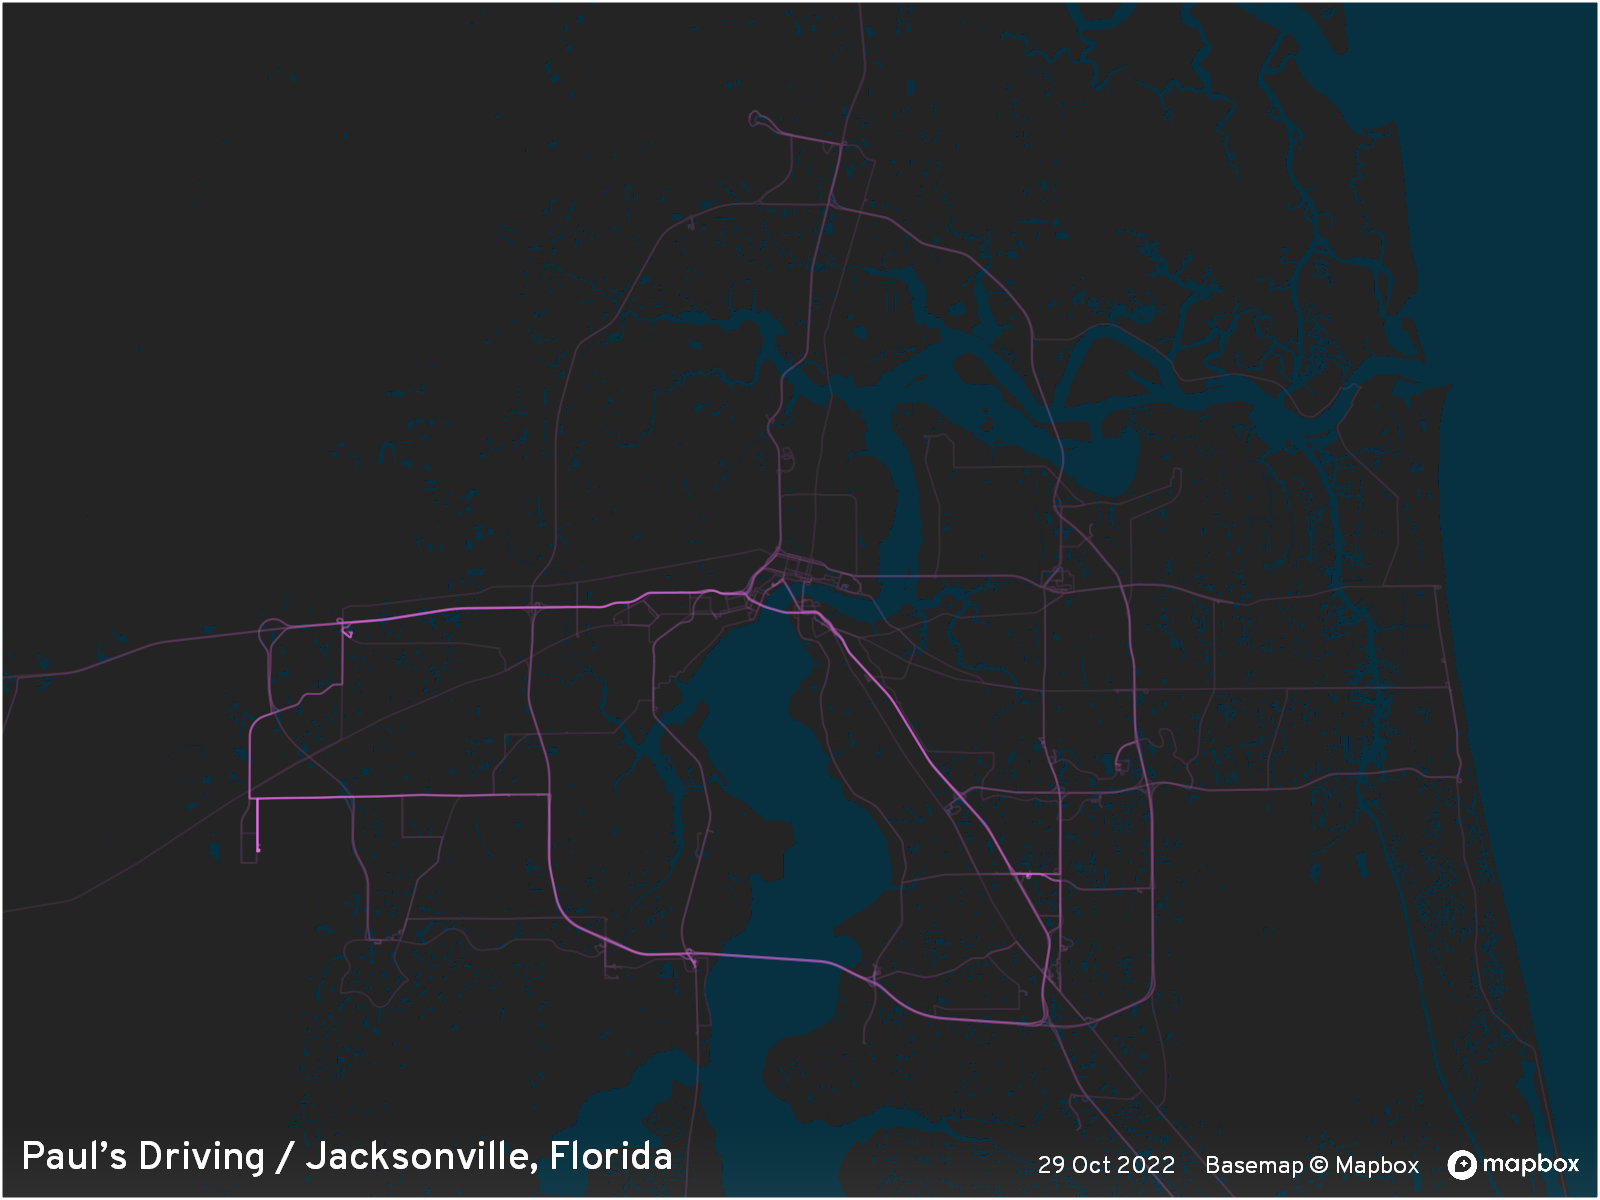 Driving density map of Jacksonville, Florida as of 29 Oct 2022.